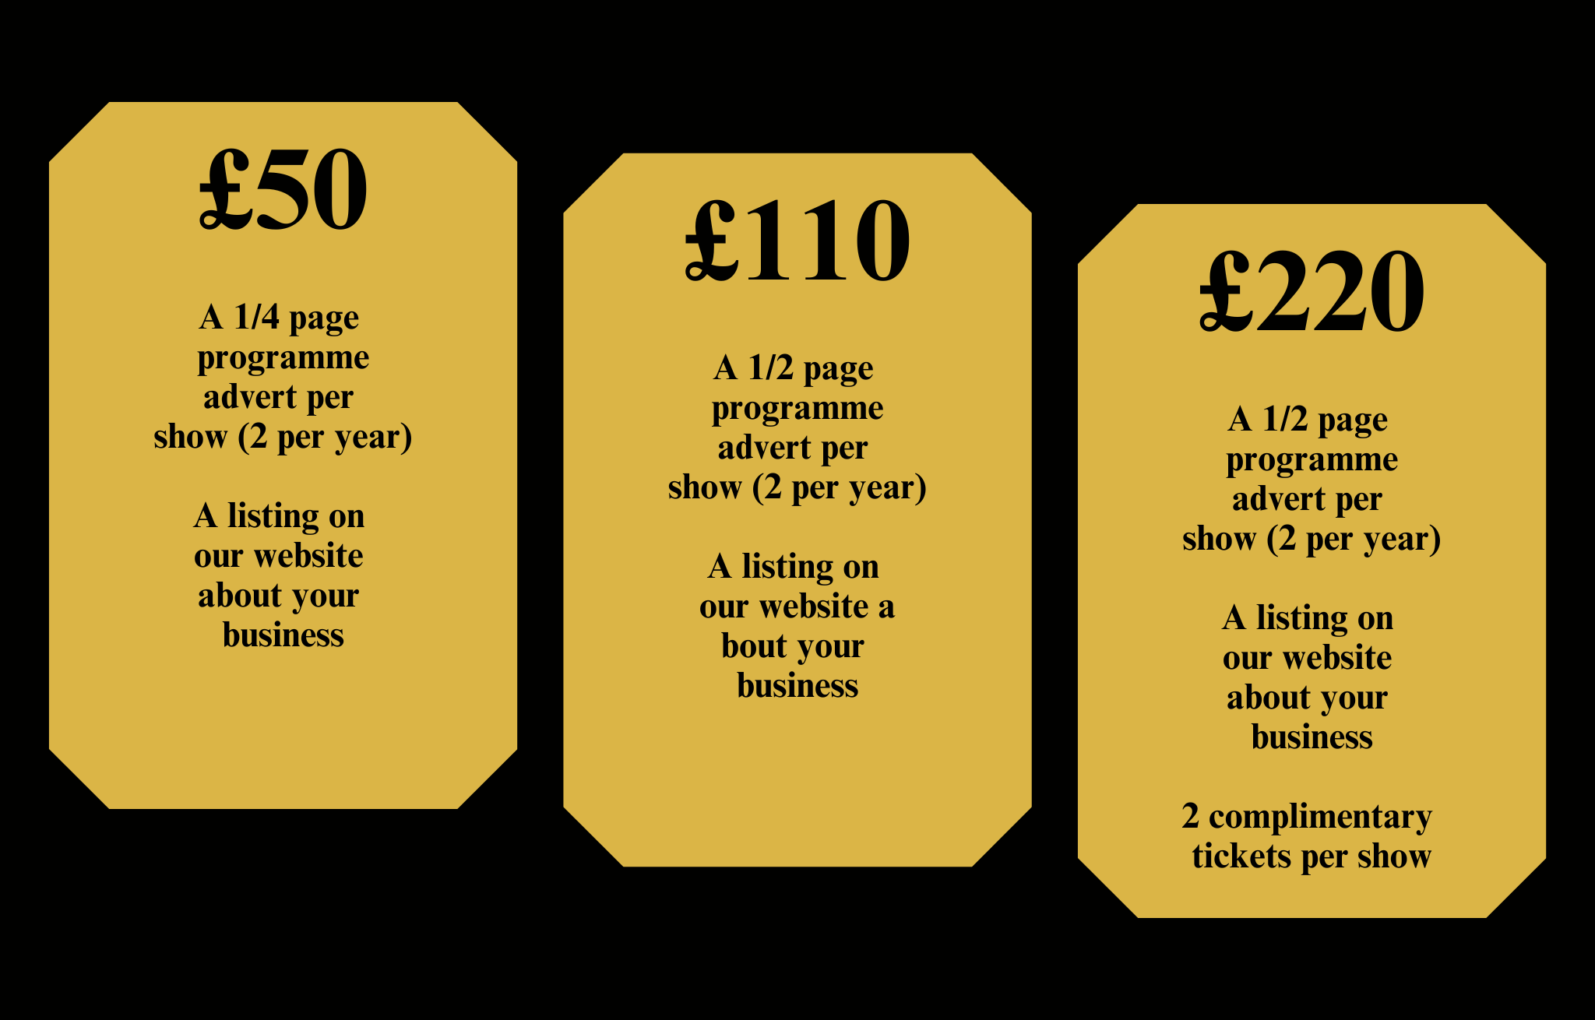 £50 - A 1/4 page programme advert per
show (2 per year), A listing on our website about your business.

£110 - A 1/2 page programme advert per show (2 per year), A listing on our website a bout your business.

£220 - A 1/2 page programme advert per show (2 per year), A listing on our website about your business, 2 complimentary tickets per show